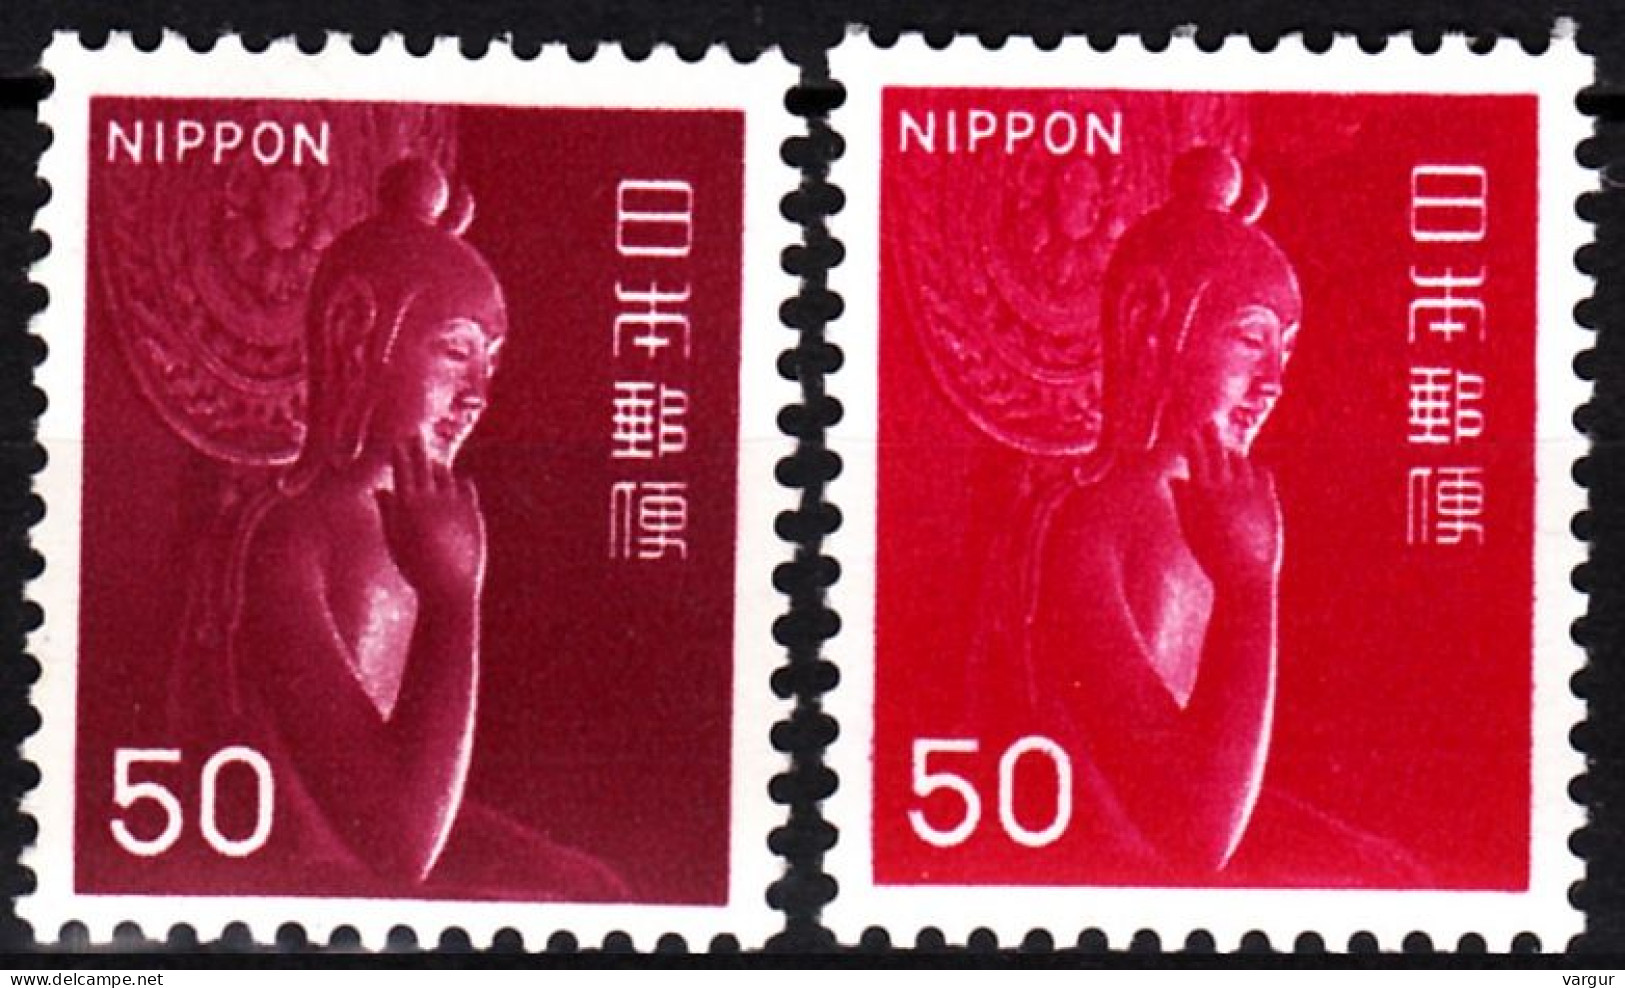 JAPAN 1966-67 Definitive With NIPPON: ART. Miroku Wooden Statue 50Y, 2 Types, MNH - Escultura